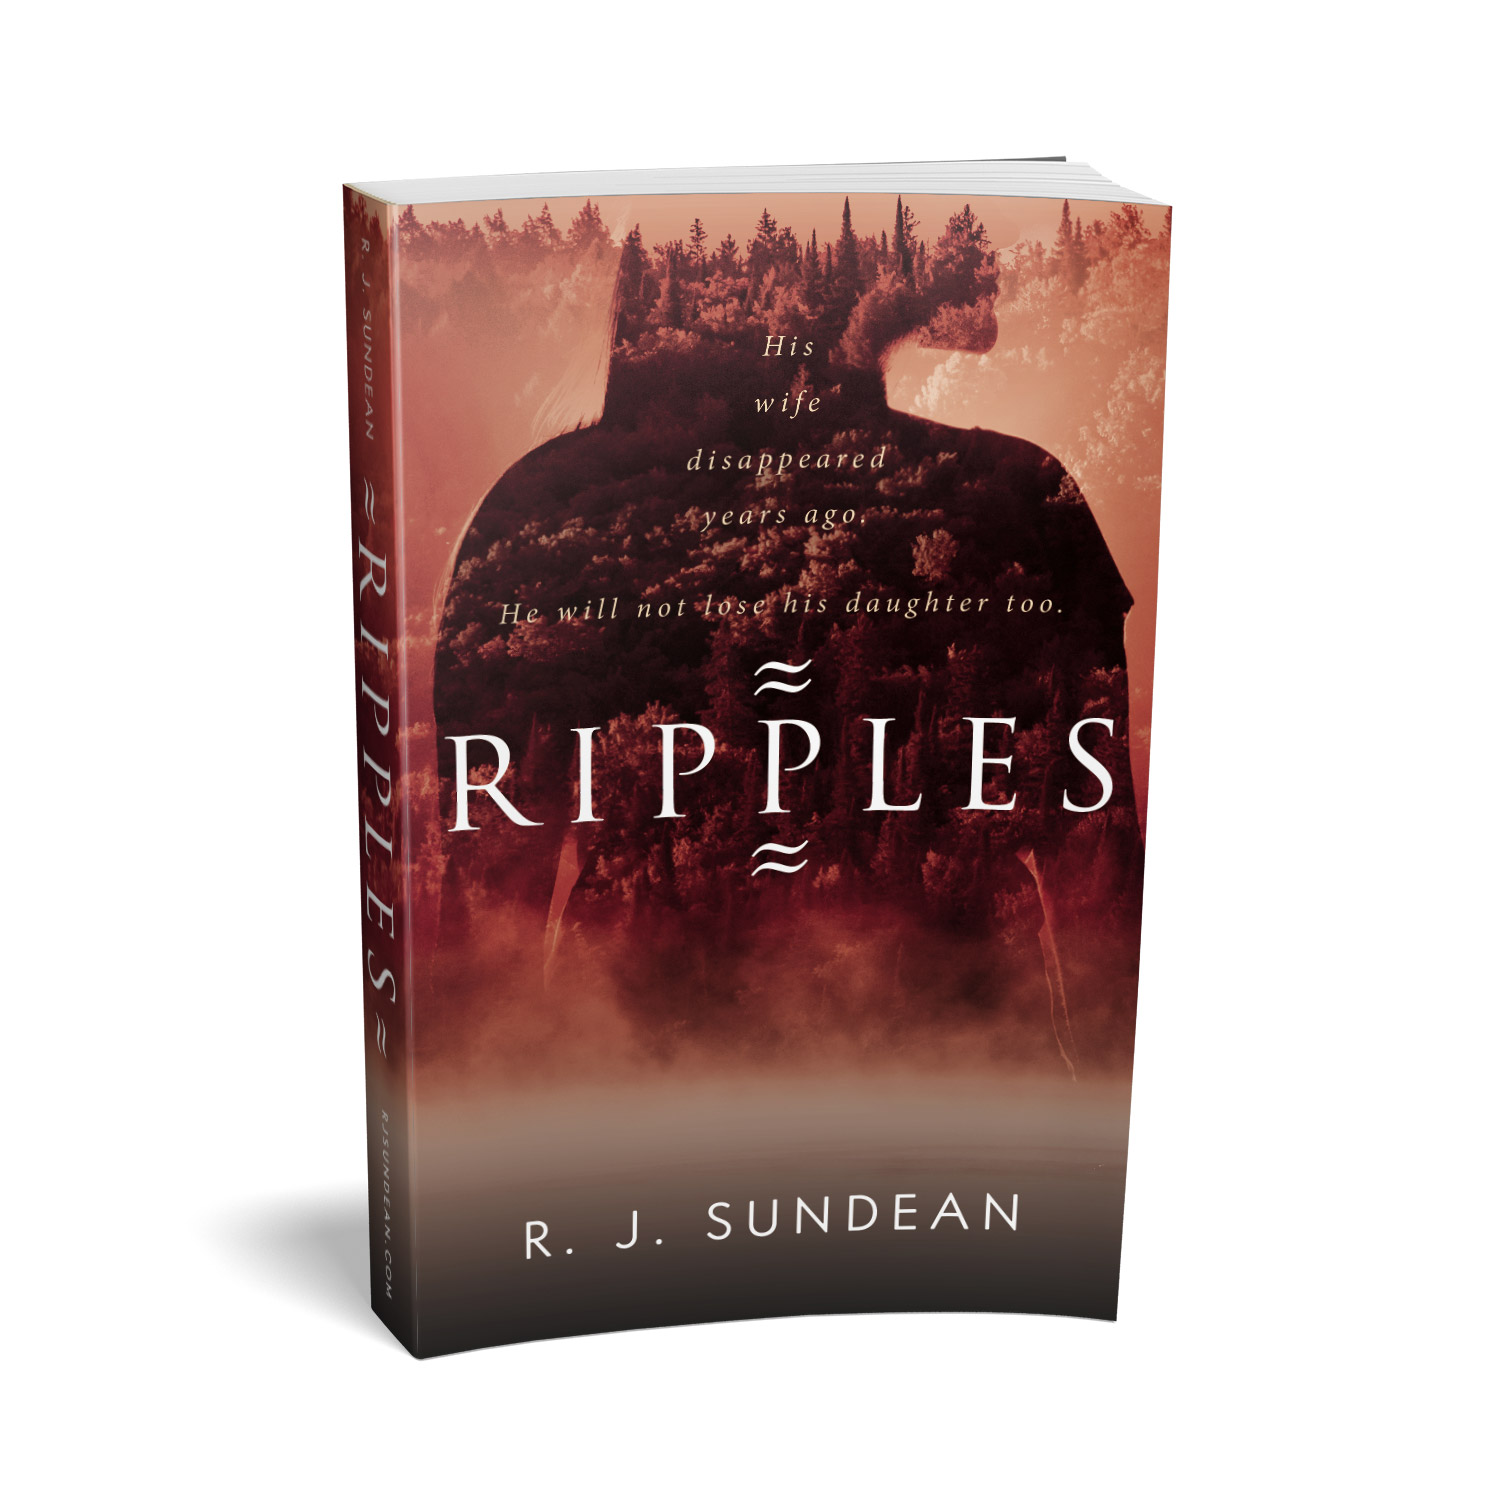 'Ripples' is an atmospheric threat thriller. The author is RJ Sundean. The cover and interior design of the book are by Mark Thomas. To learn more about what Mark could do for your book, please visit coverness.com.